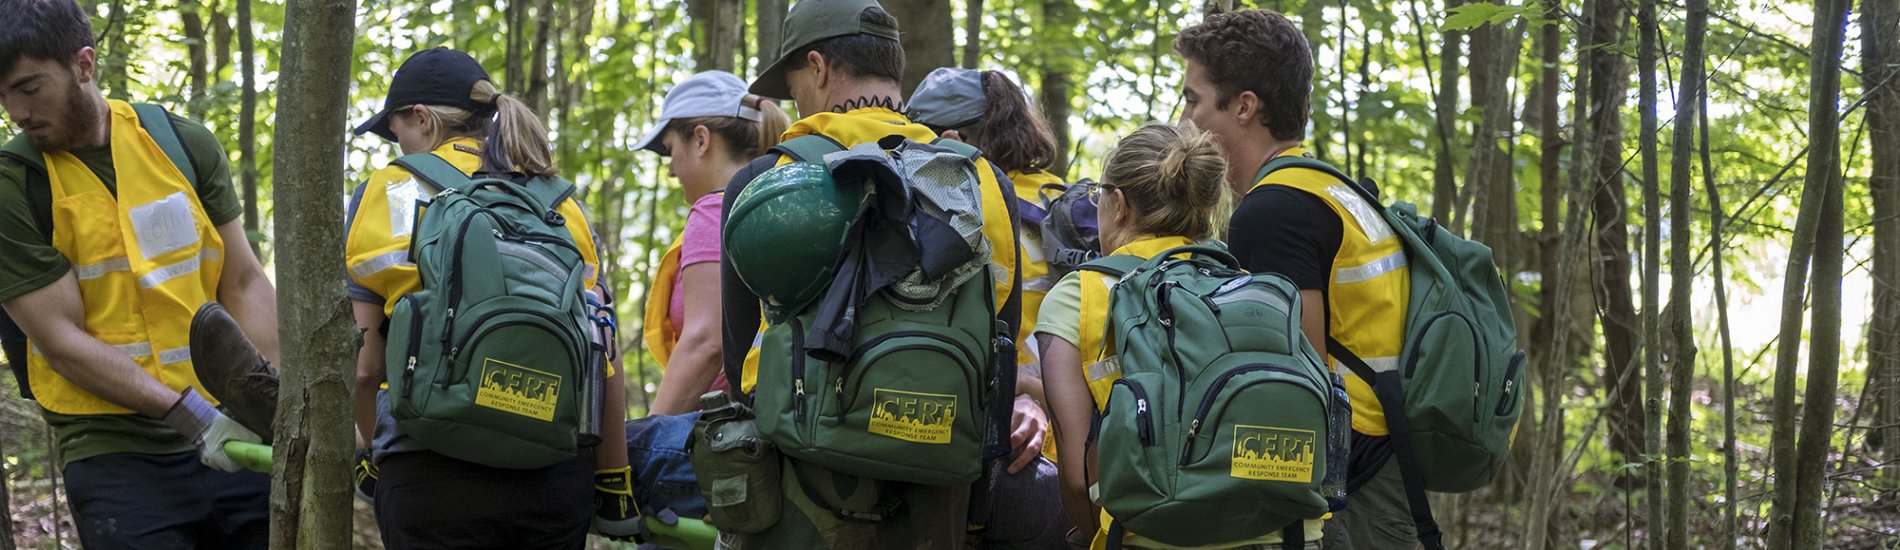 A group of students wearing backpacks doing field training in the woods.